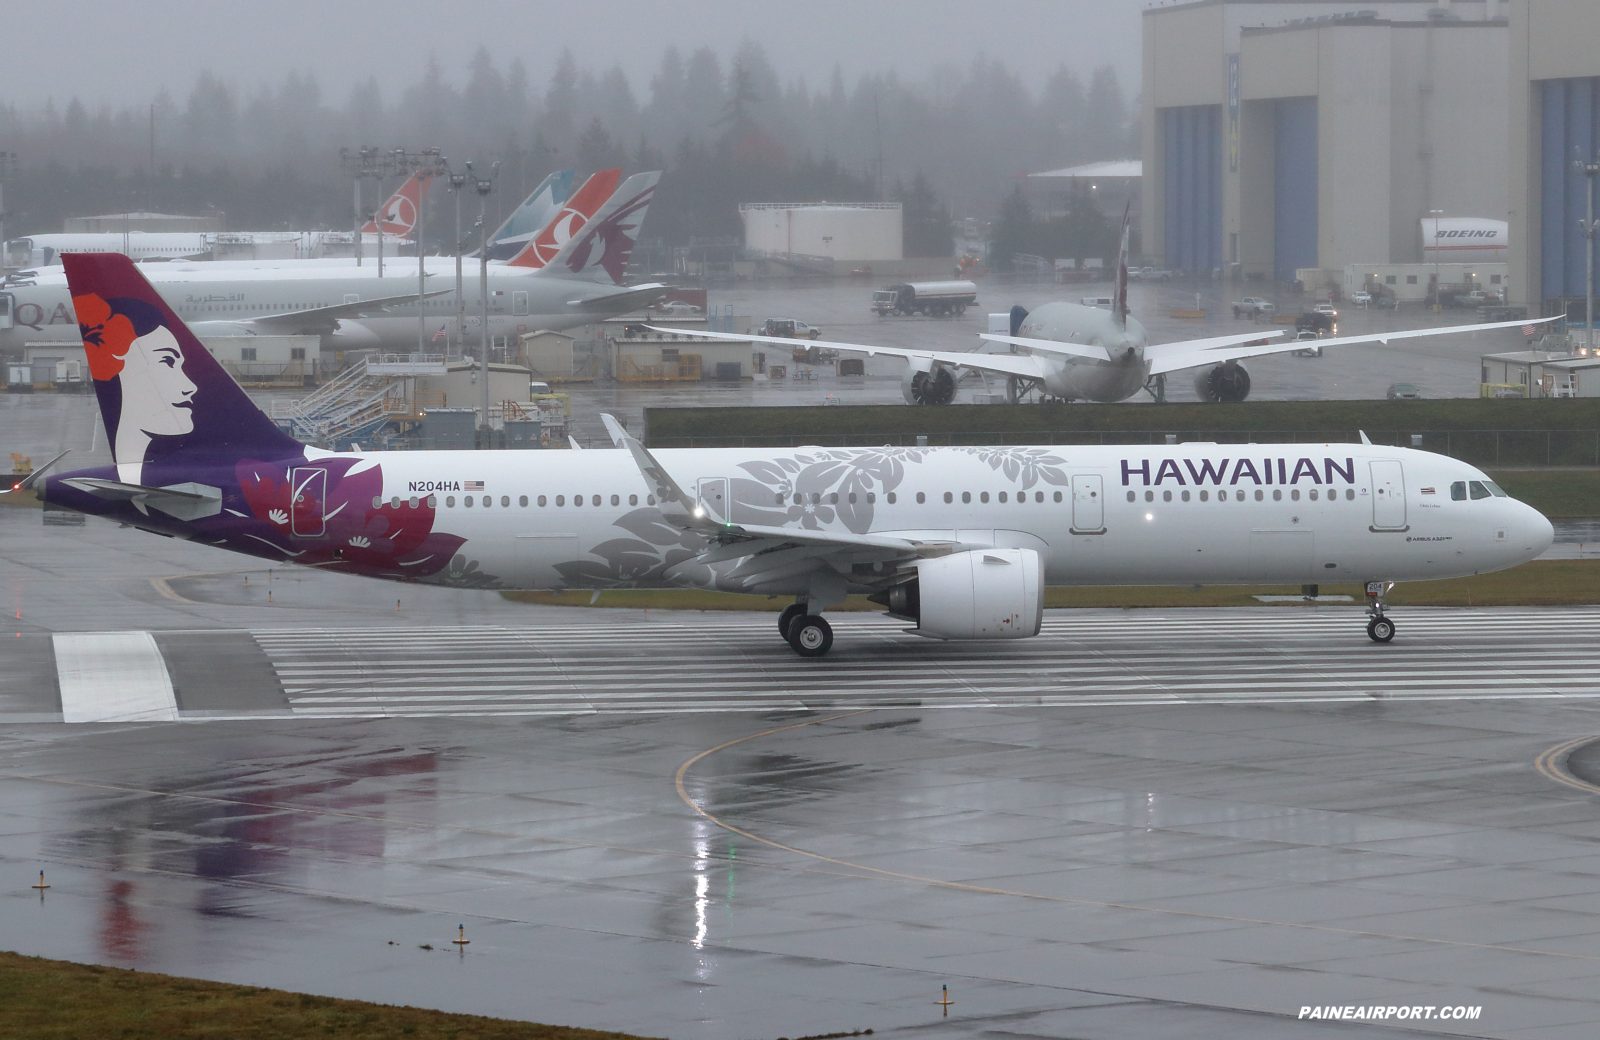 Hawaiian Airlines A321 N204HA at Paine Field